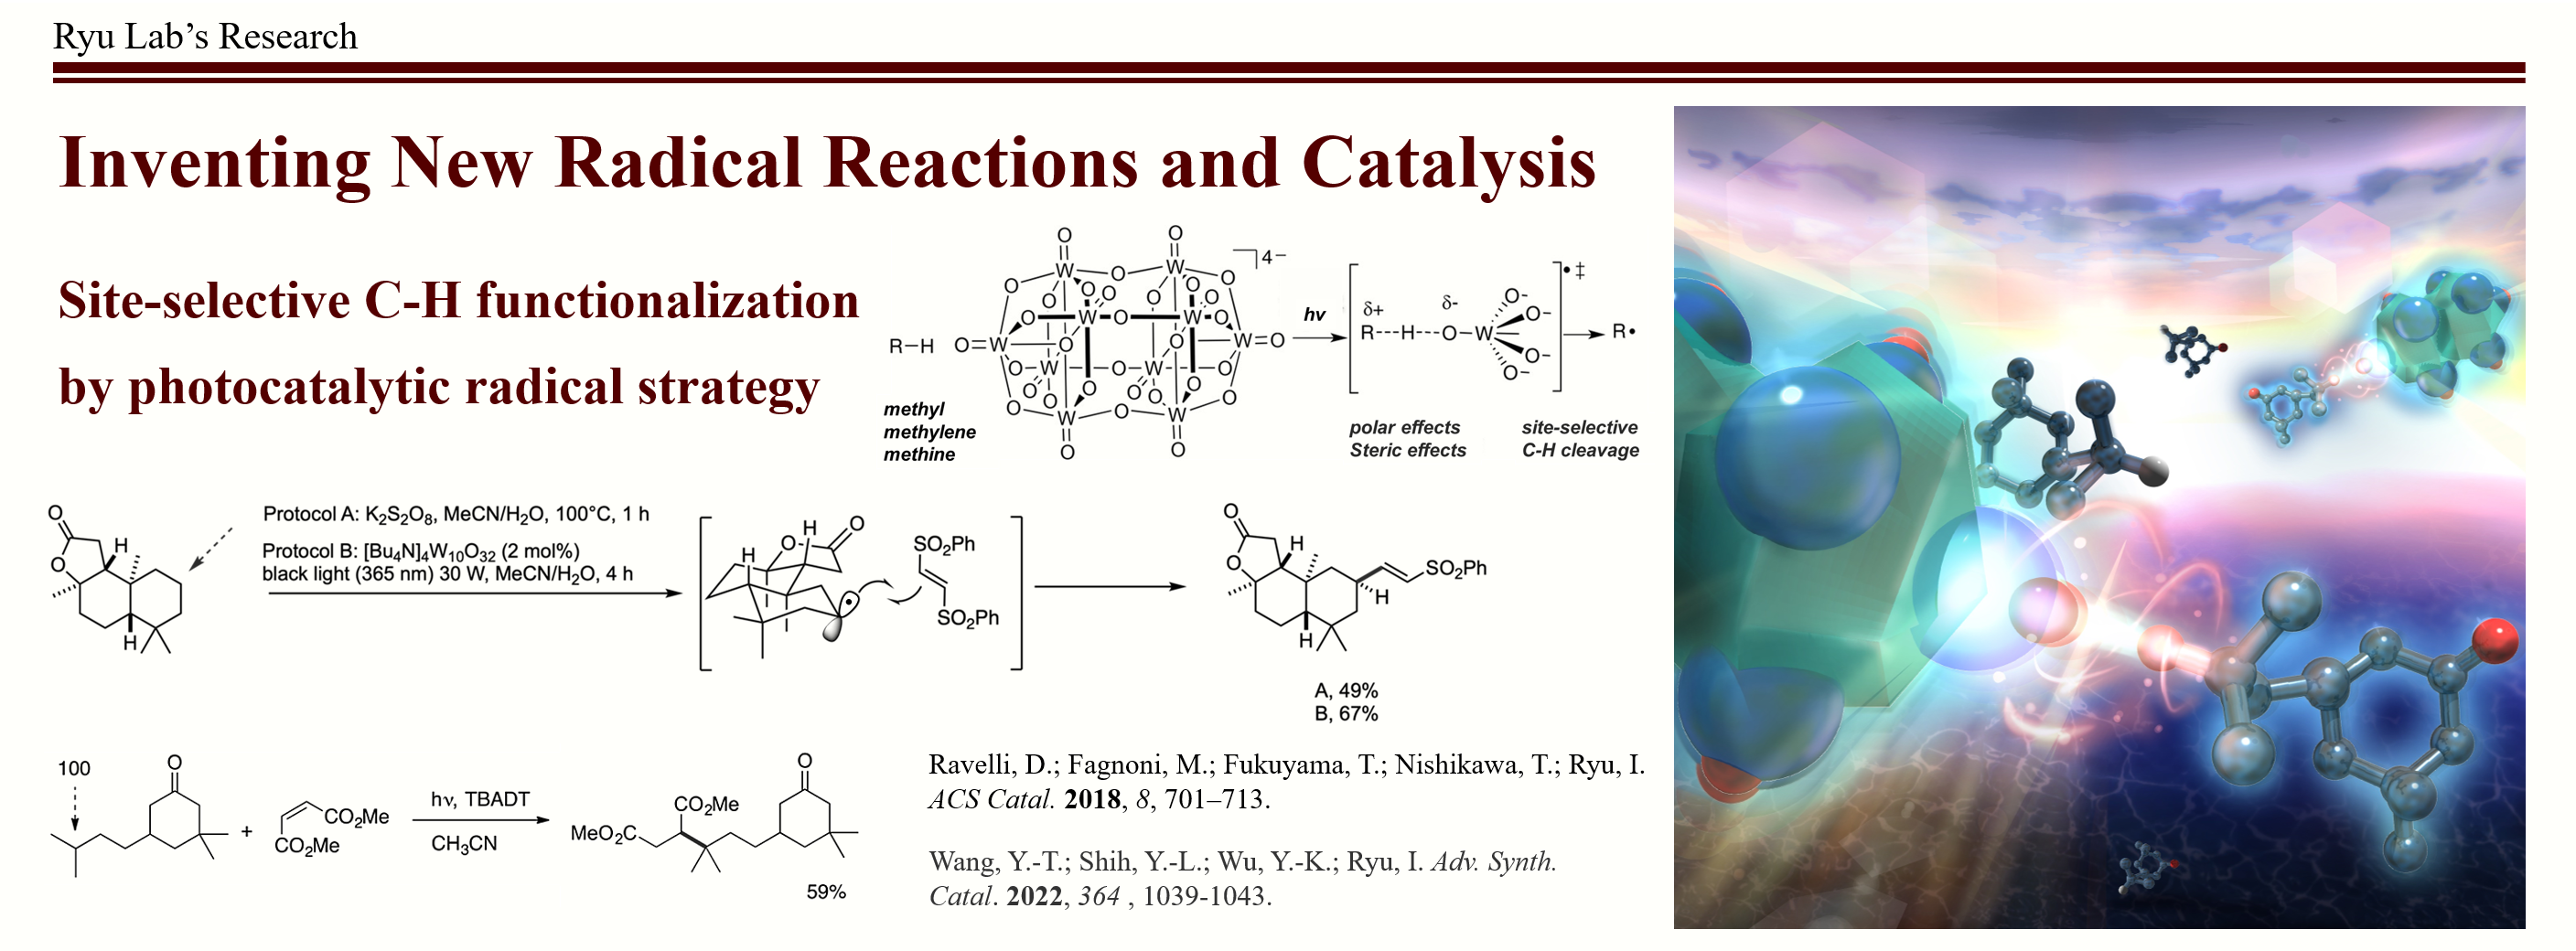 Radials and catalysis